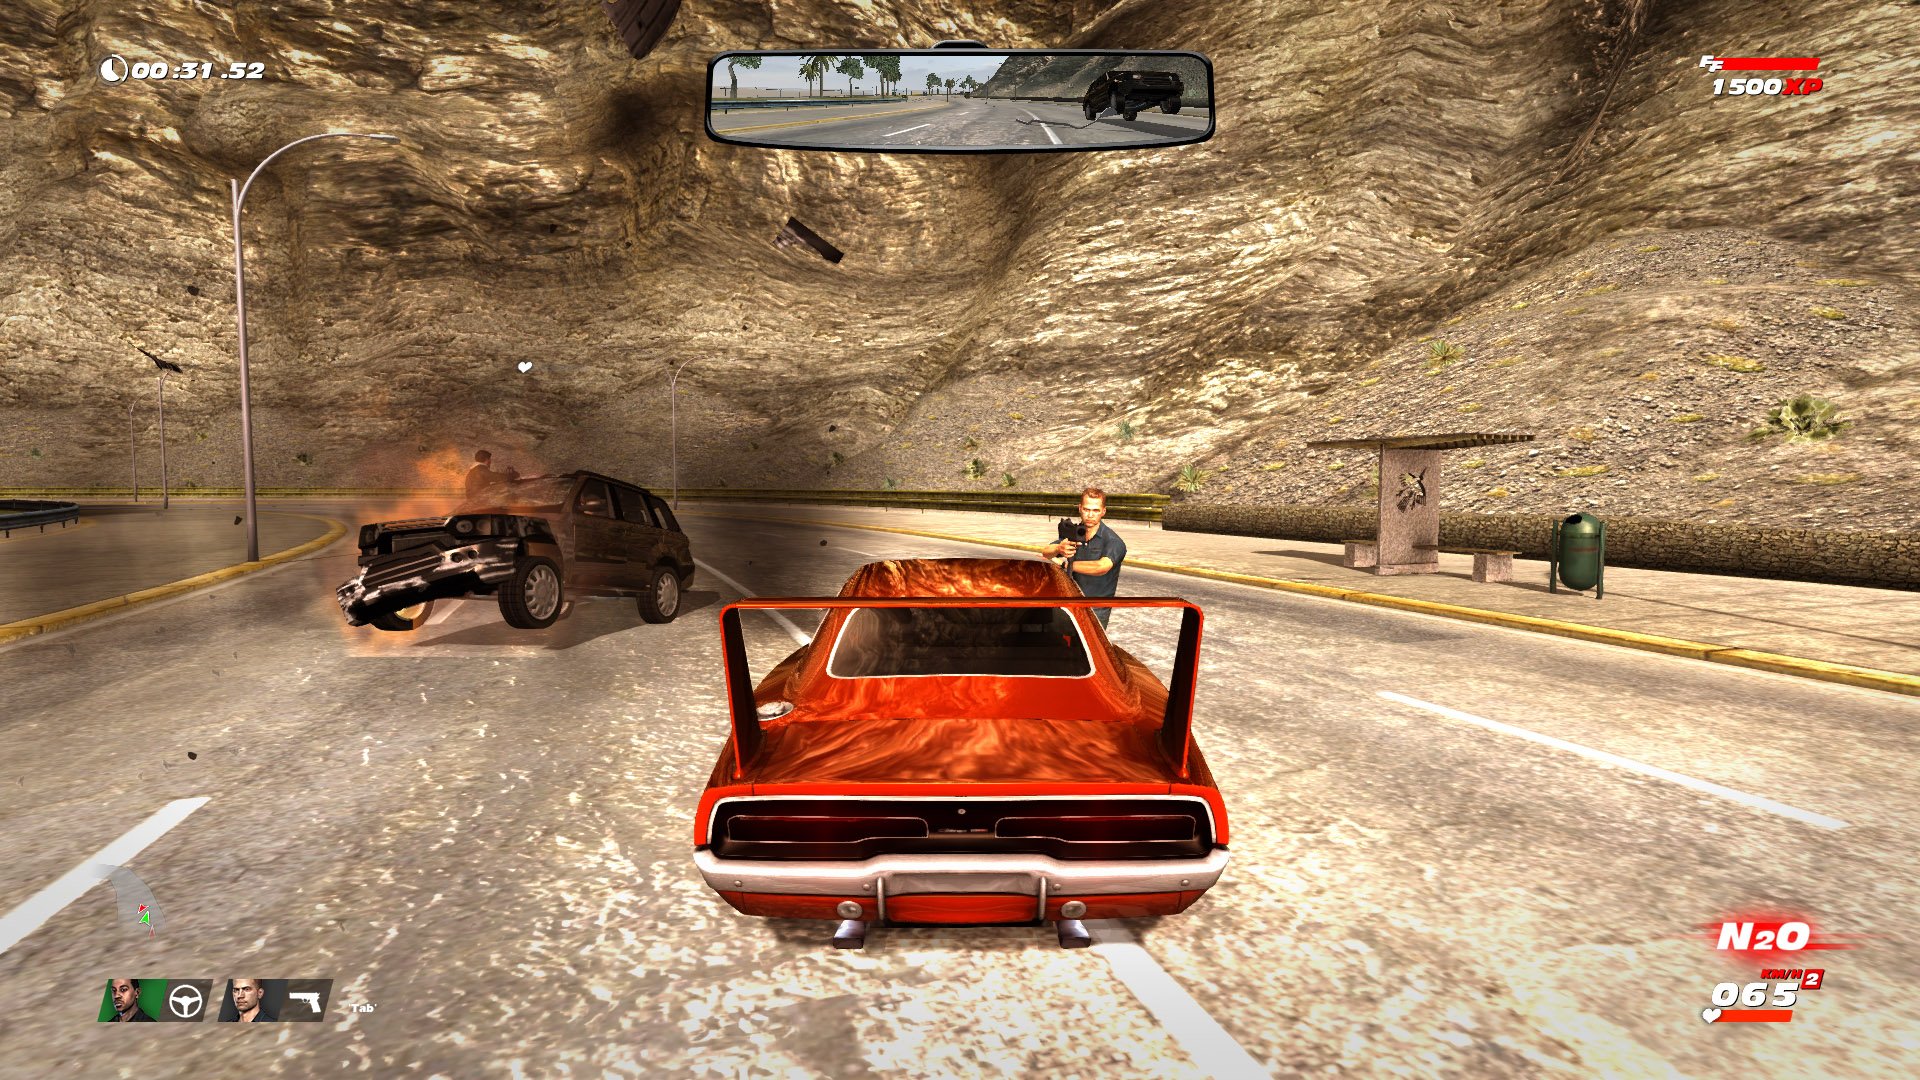 Gb games download. Форсаж схватка Xbox 360. Fast and Furious игра. Форсаж схватка ps3. Игра Форсаж схватка.